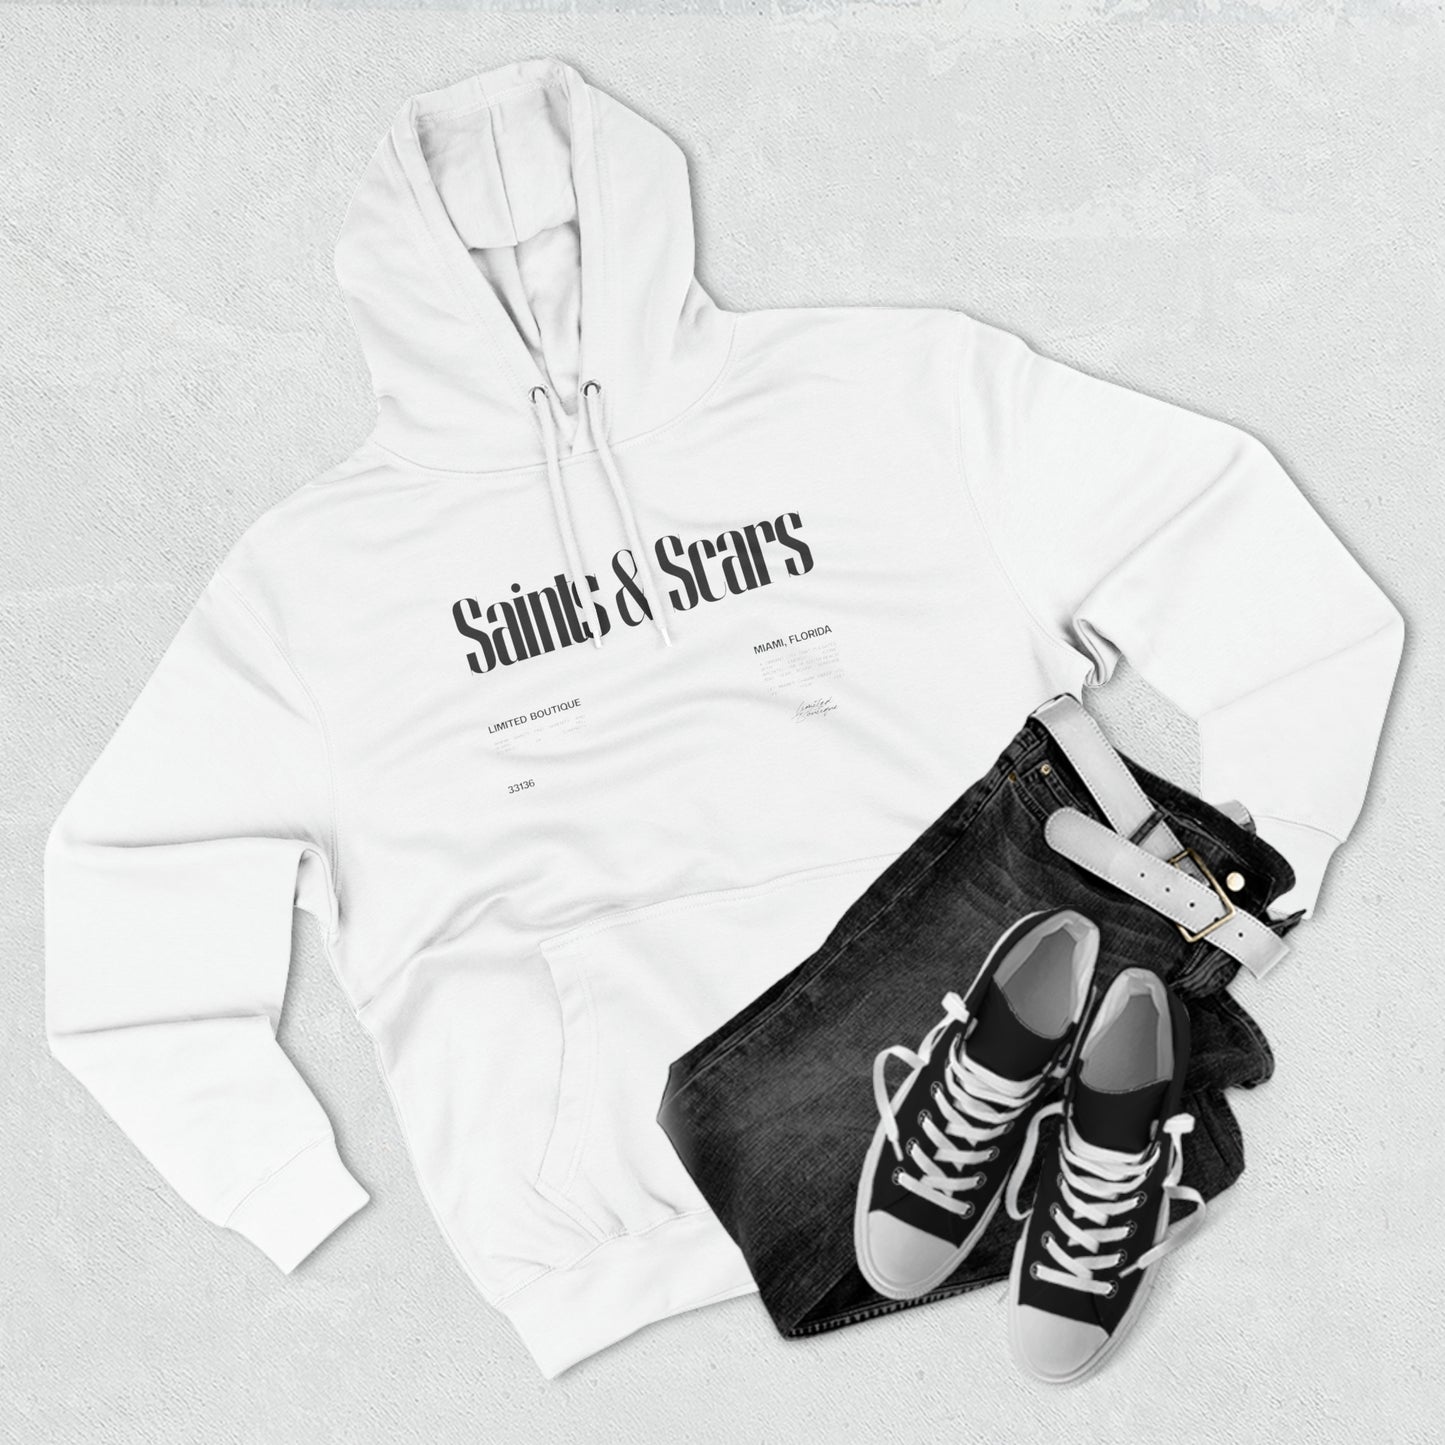 S&S Central Hoodie